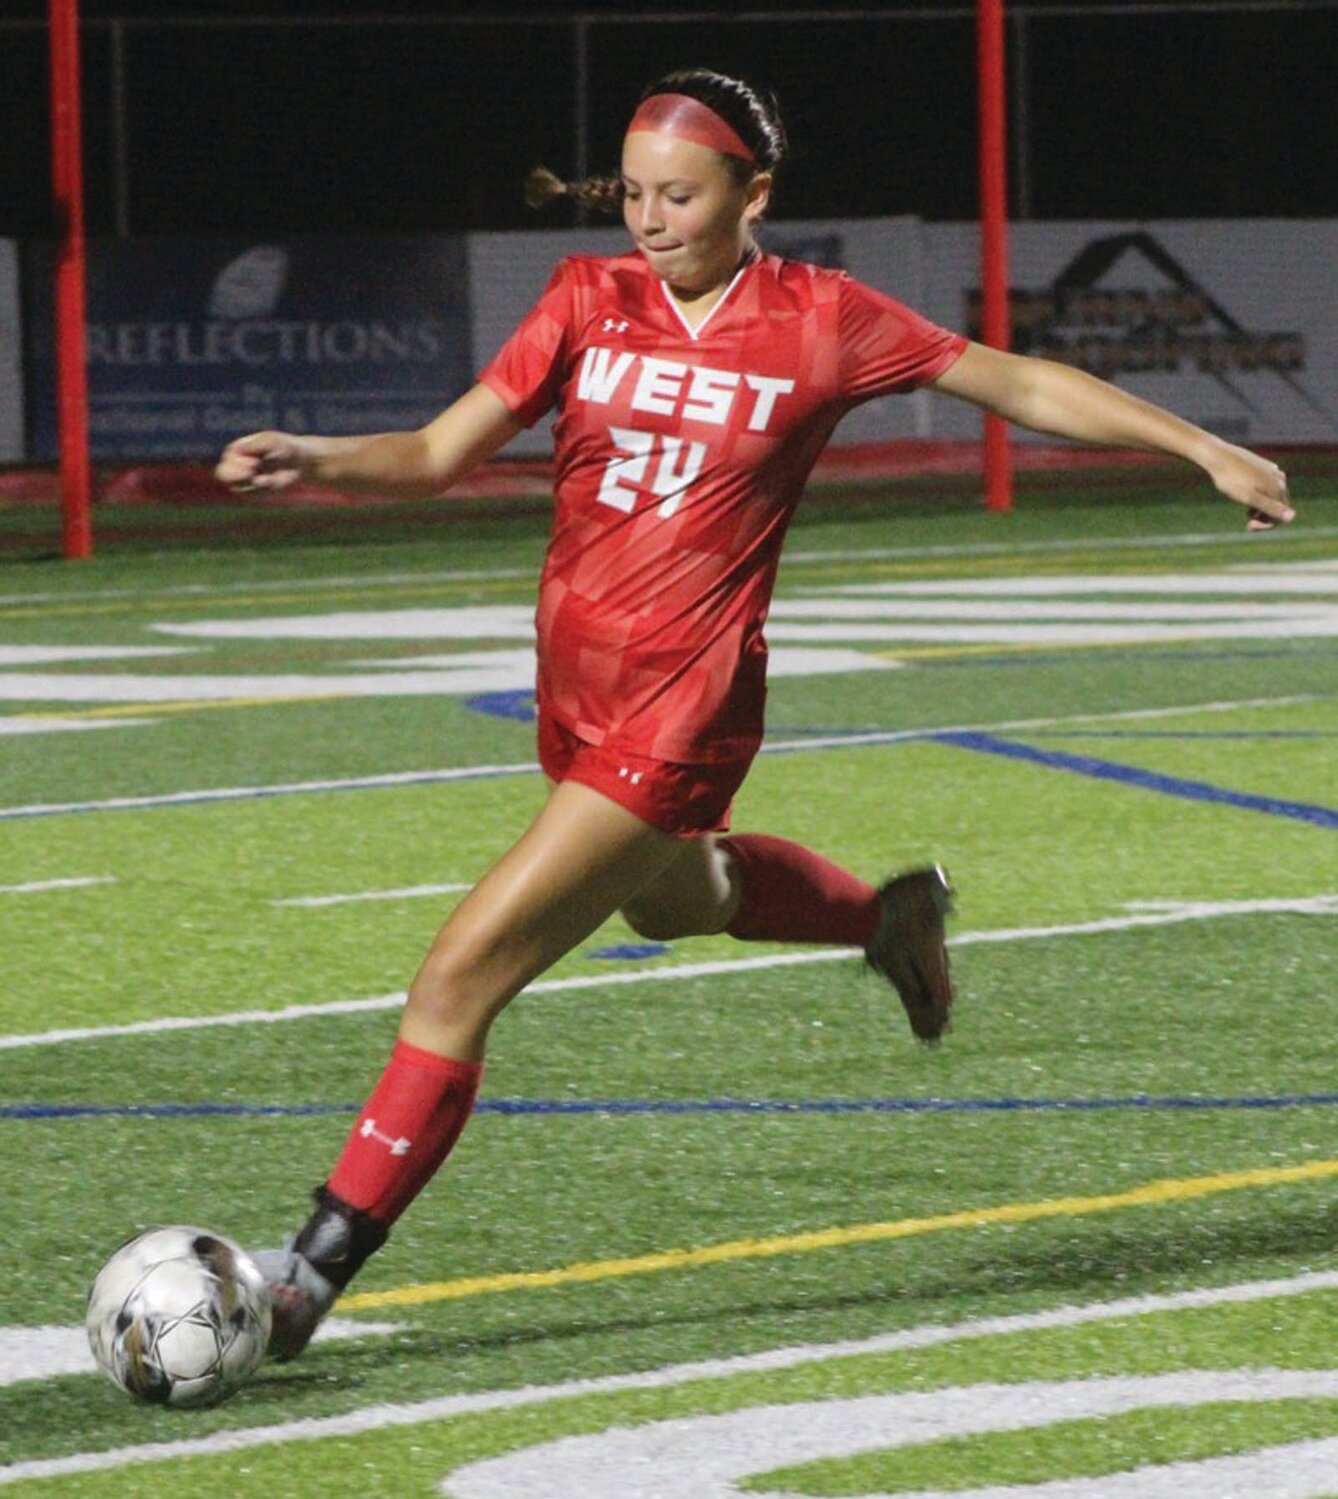 BEST FOOT FORWARD: Caitlyn Blanchette looks to clear the zone.